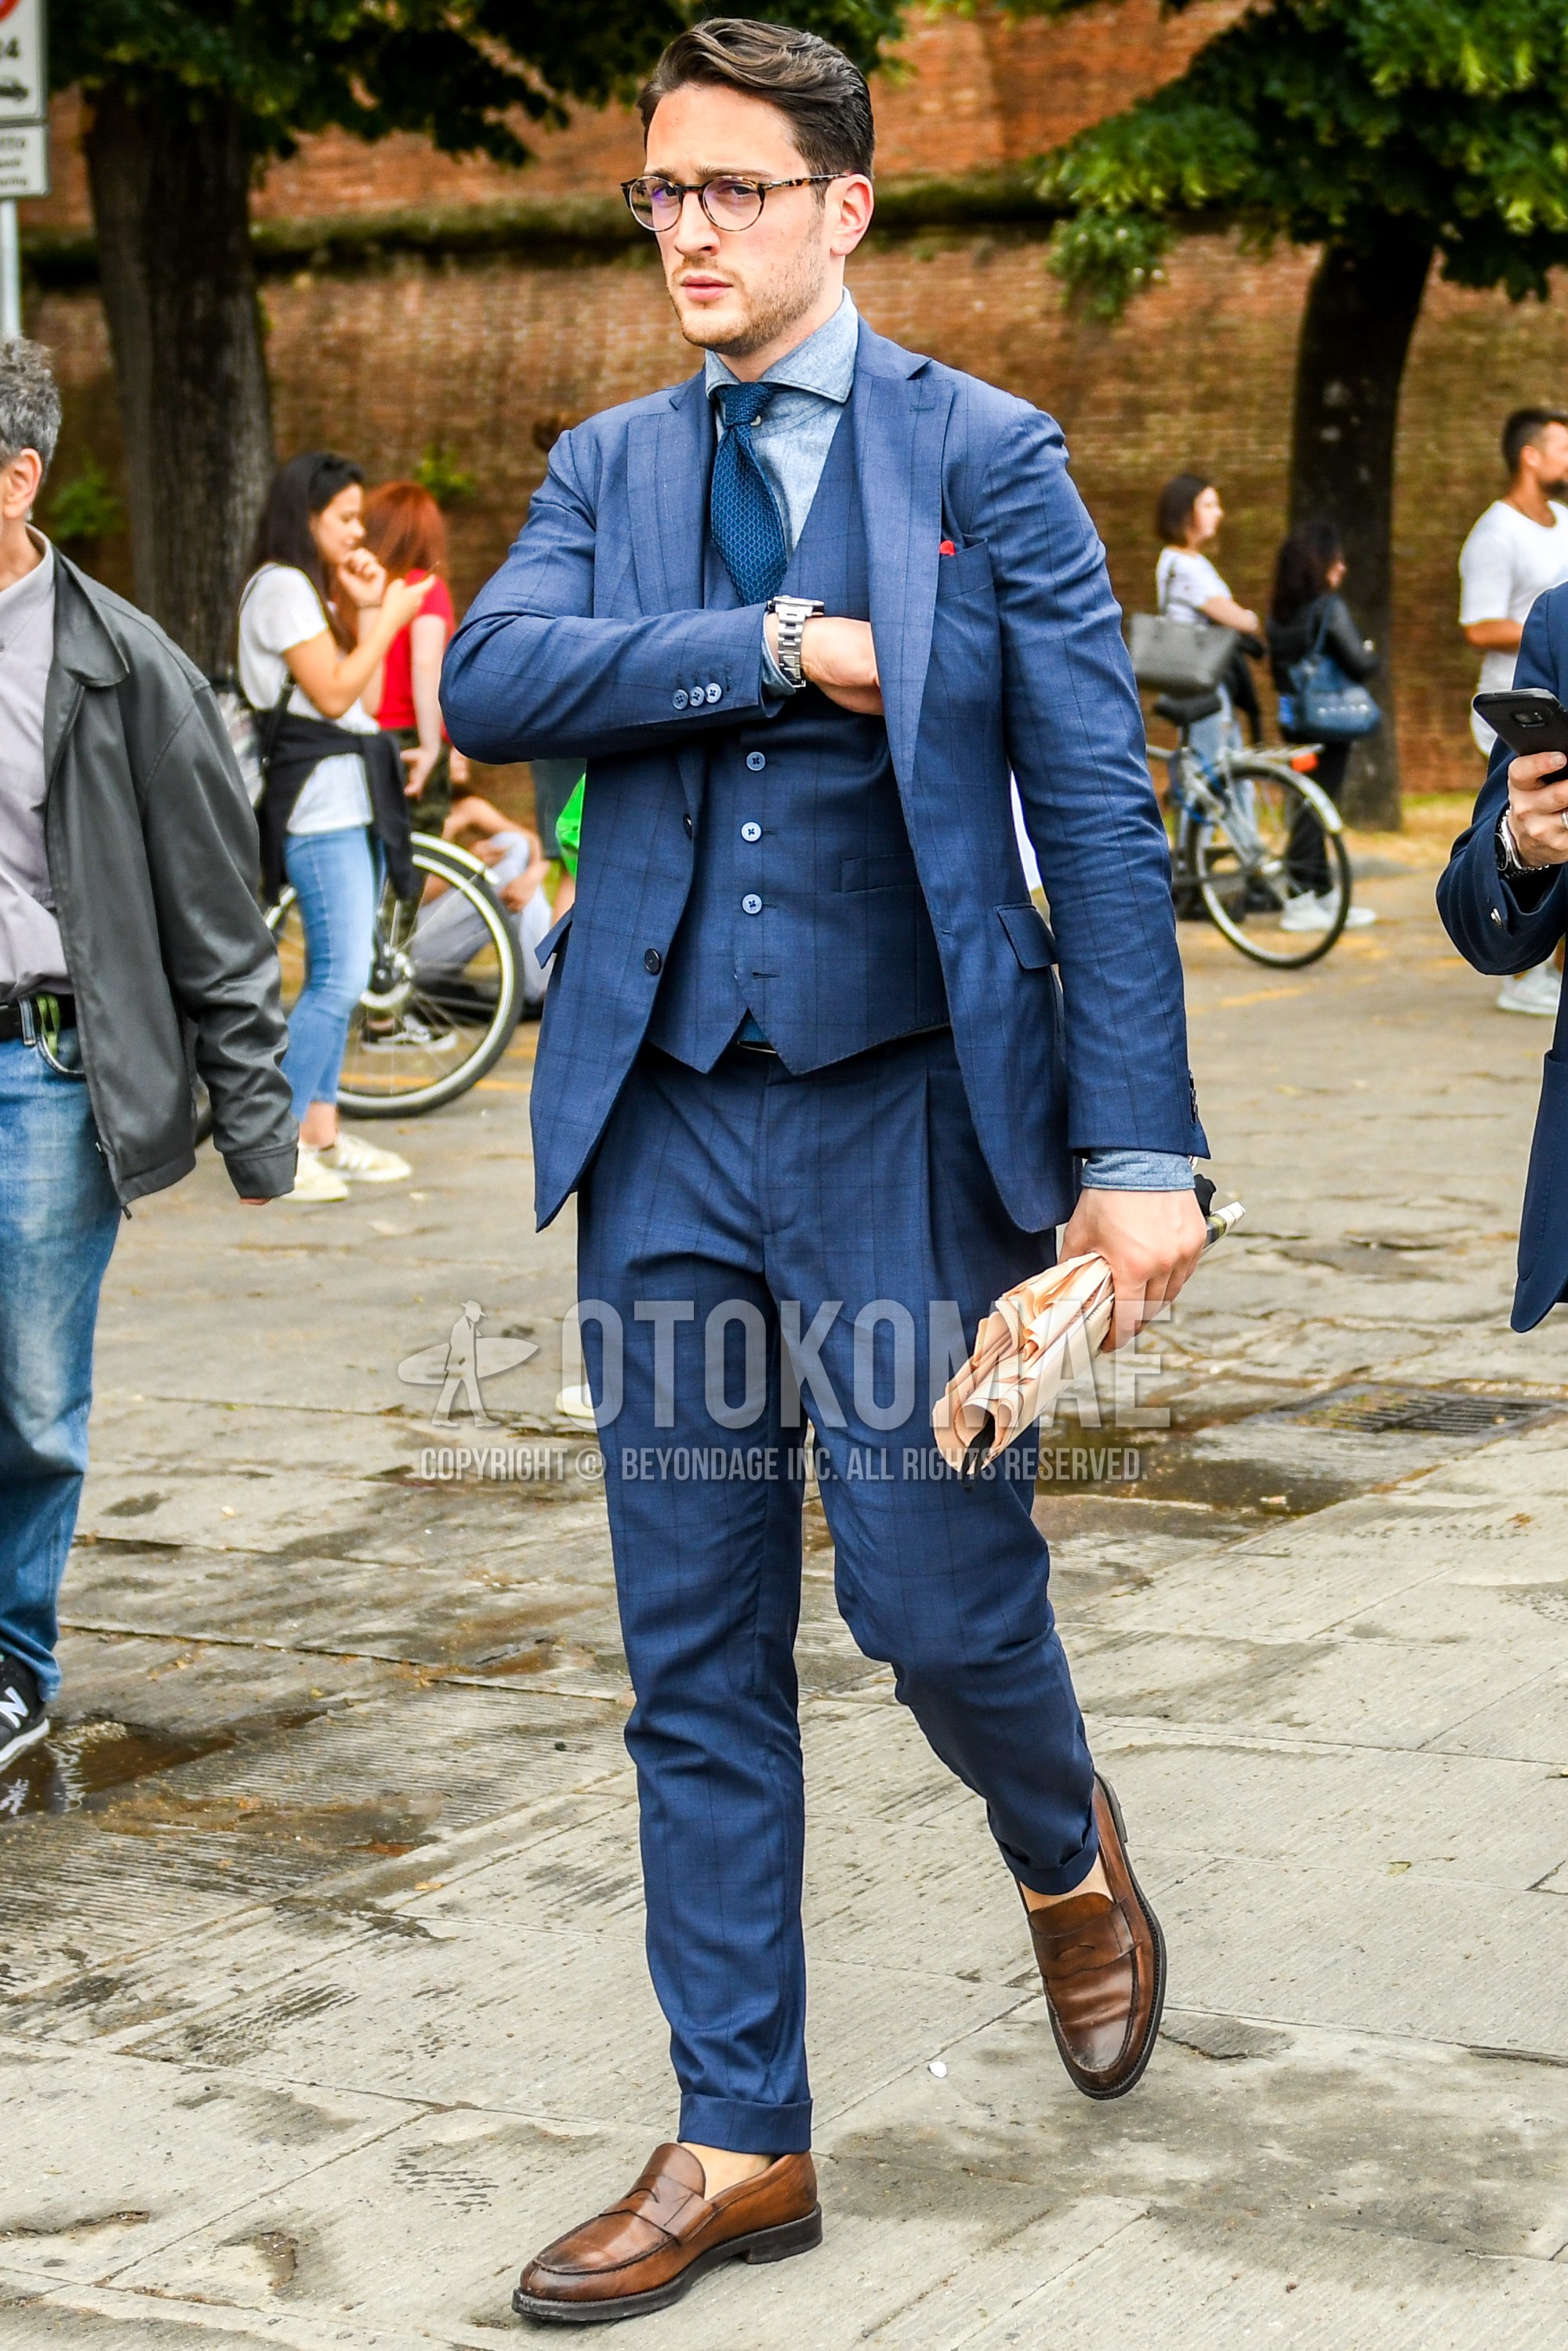 Men's spring autumn outfit with beige tortoiseshell glasses, light blue plain denim shirt/chambray shirt, brown coin loafers leather shoes, blue check three-piece suit, blue necktie necktie.